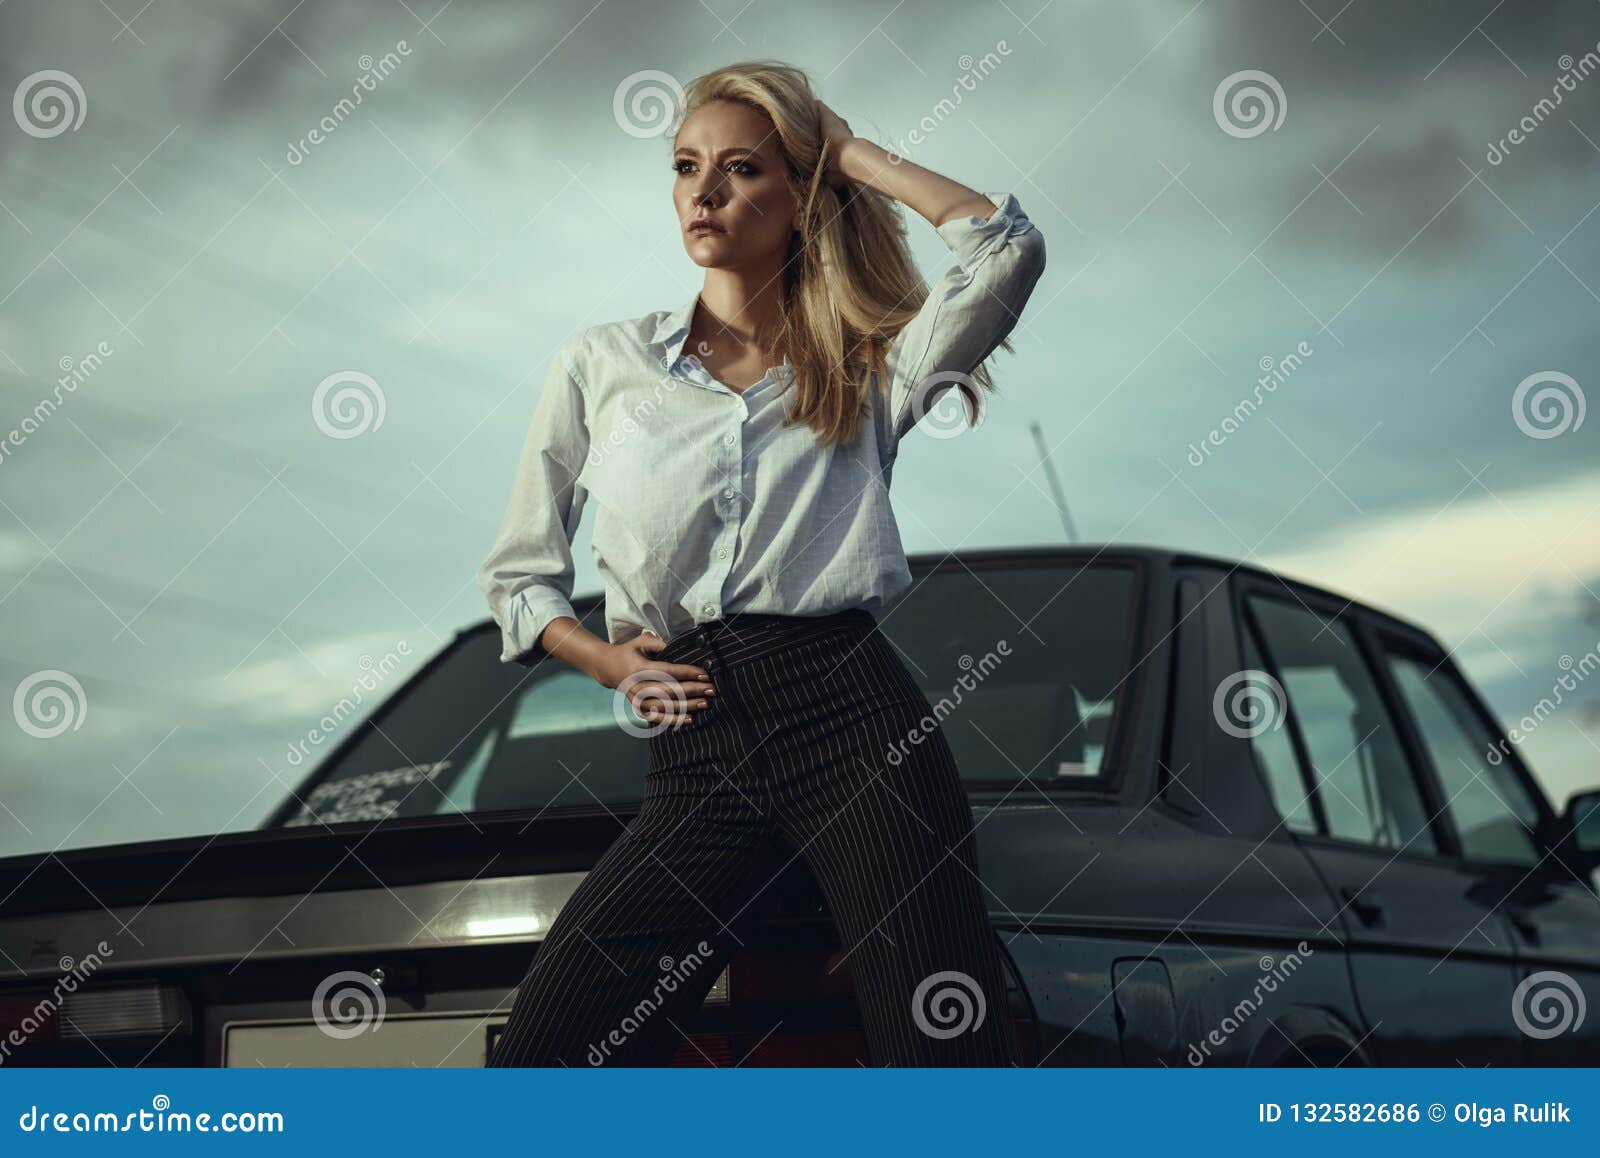 beautiful blond lady in black striped high waisted pants and oversized white blouse standing at her old car looking away